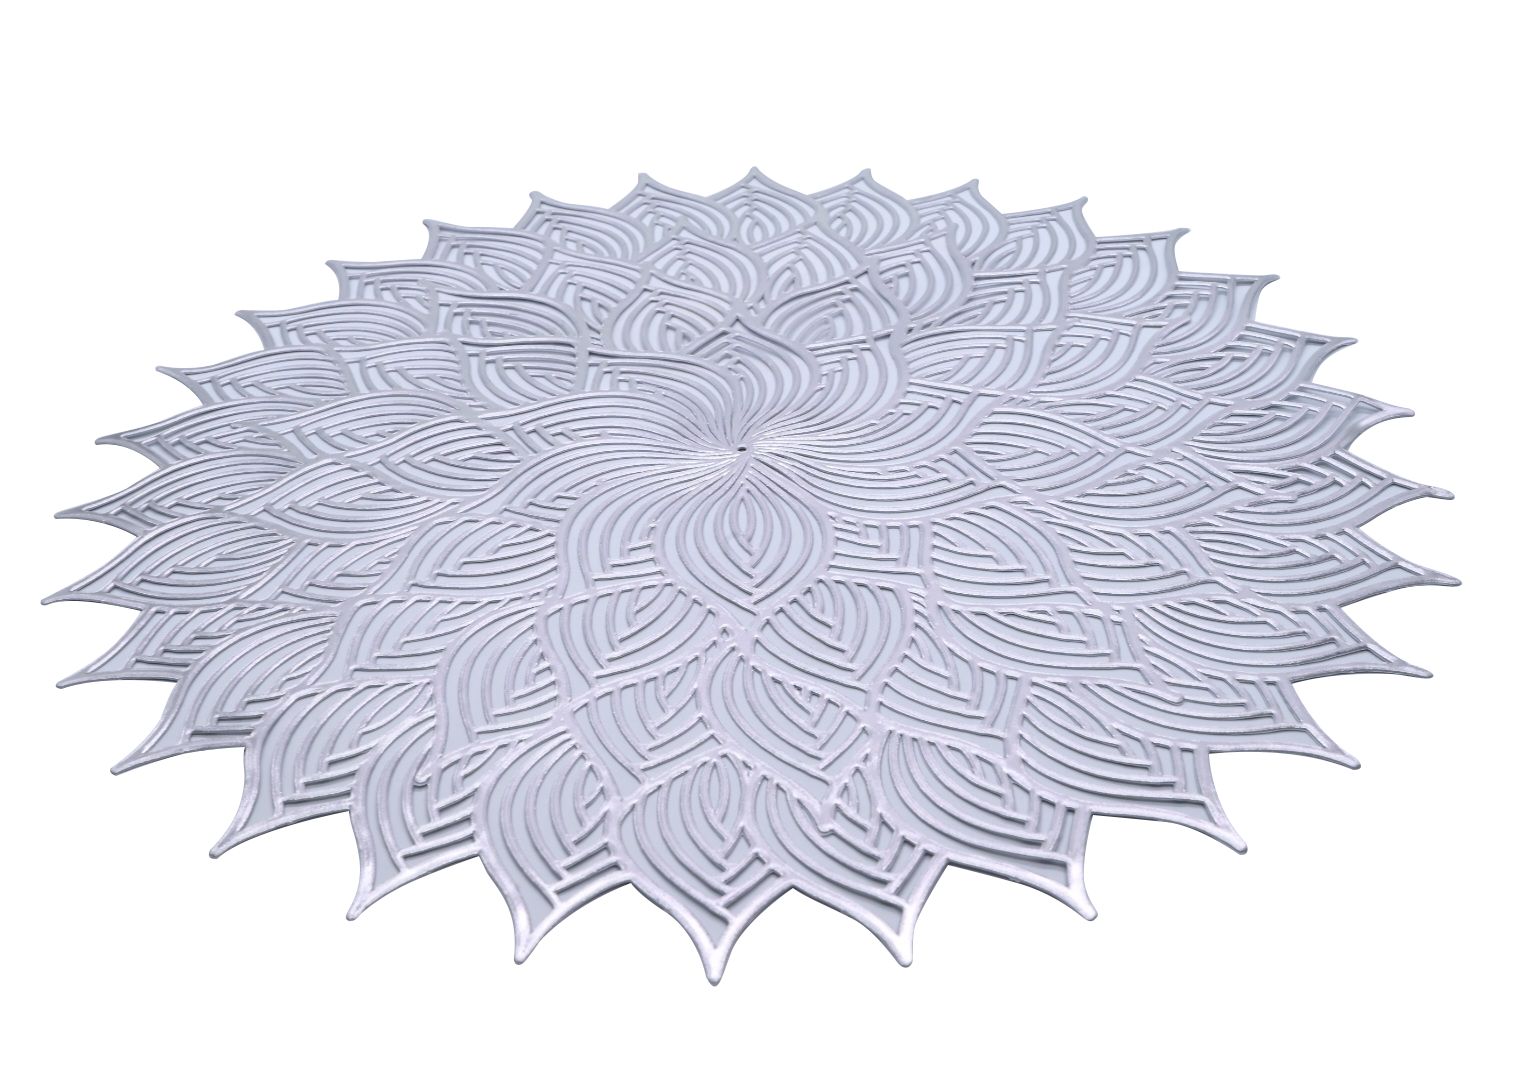 Plastic Placemats with Floral Pattern